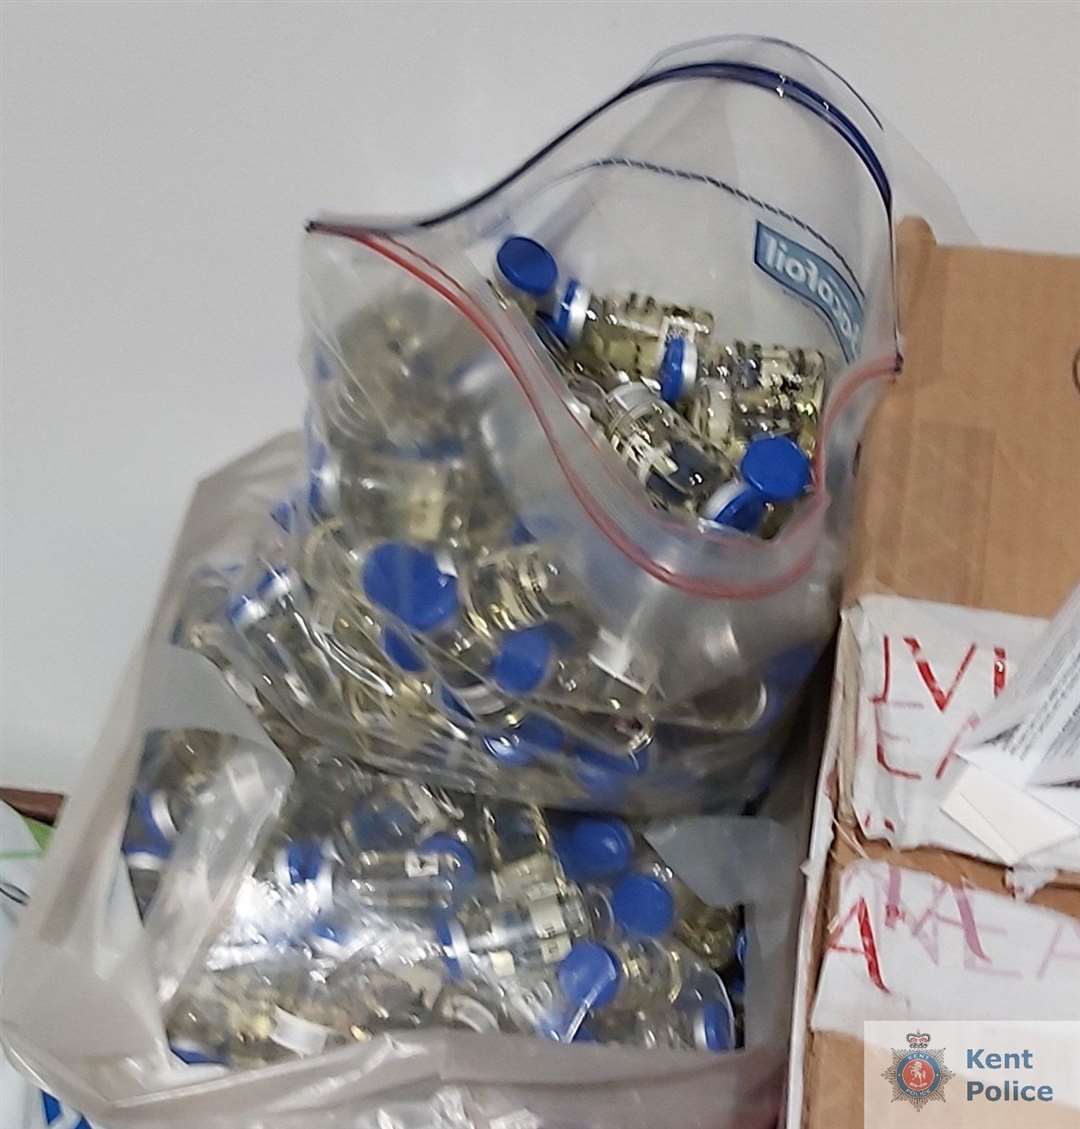 Steroids were also seized by police from a house in Gravesend